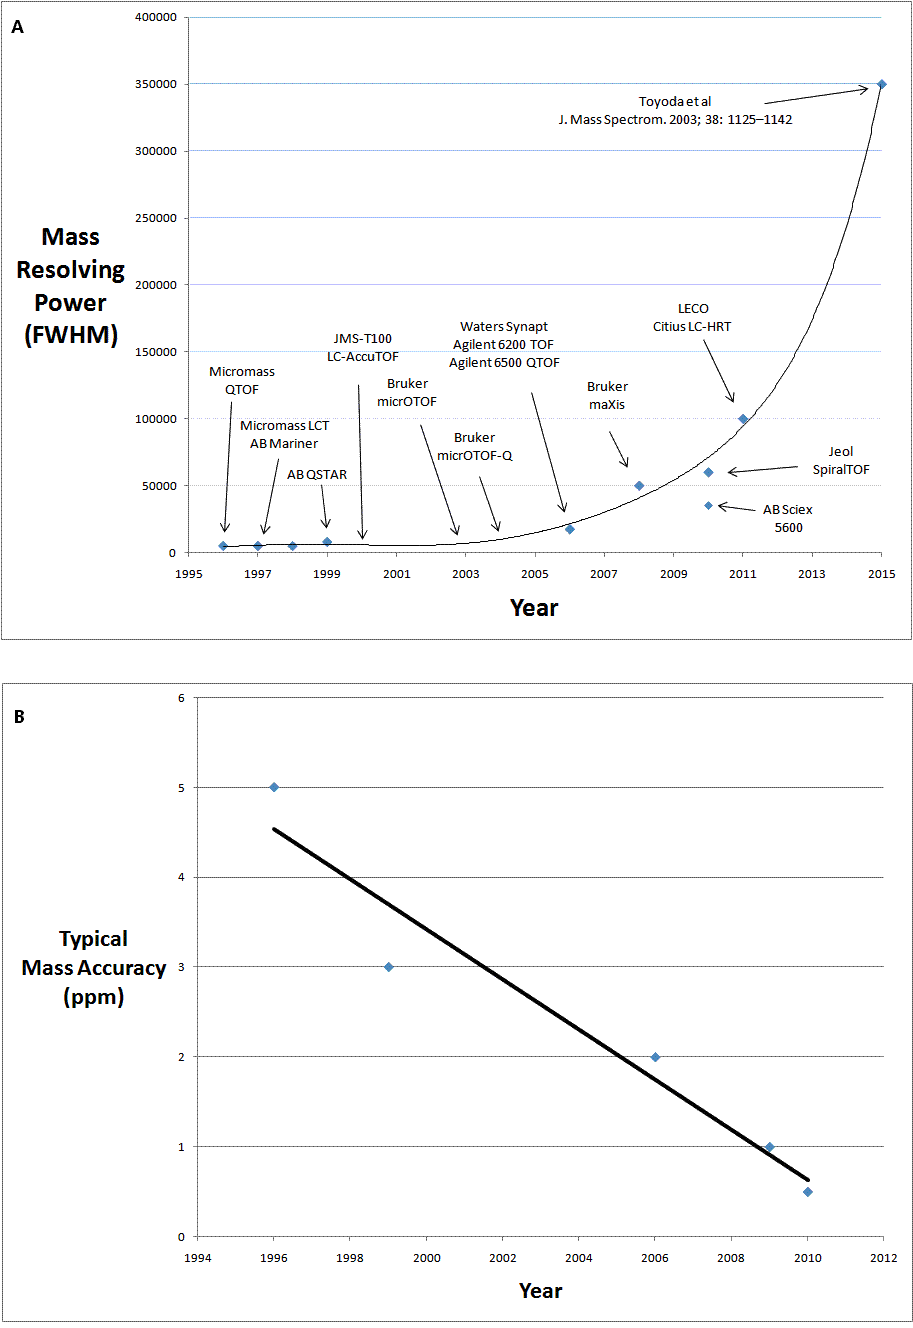 Figure 1 (A) the increase in mass resolving power of commercially available instruments from 1996 to the present and (B) the improvement in mass accuracy over the same time period